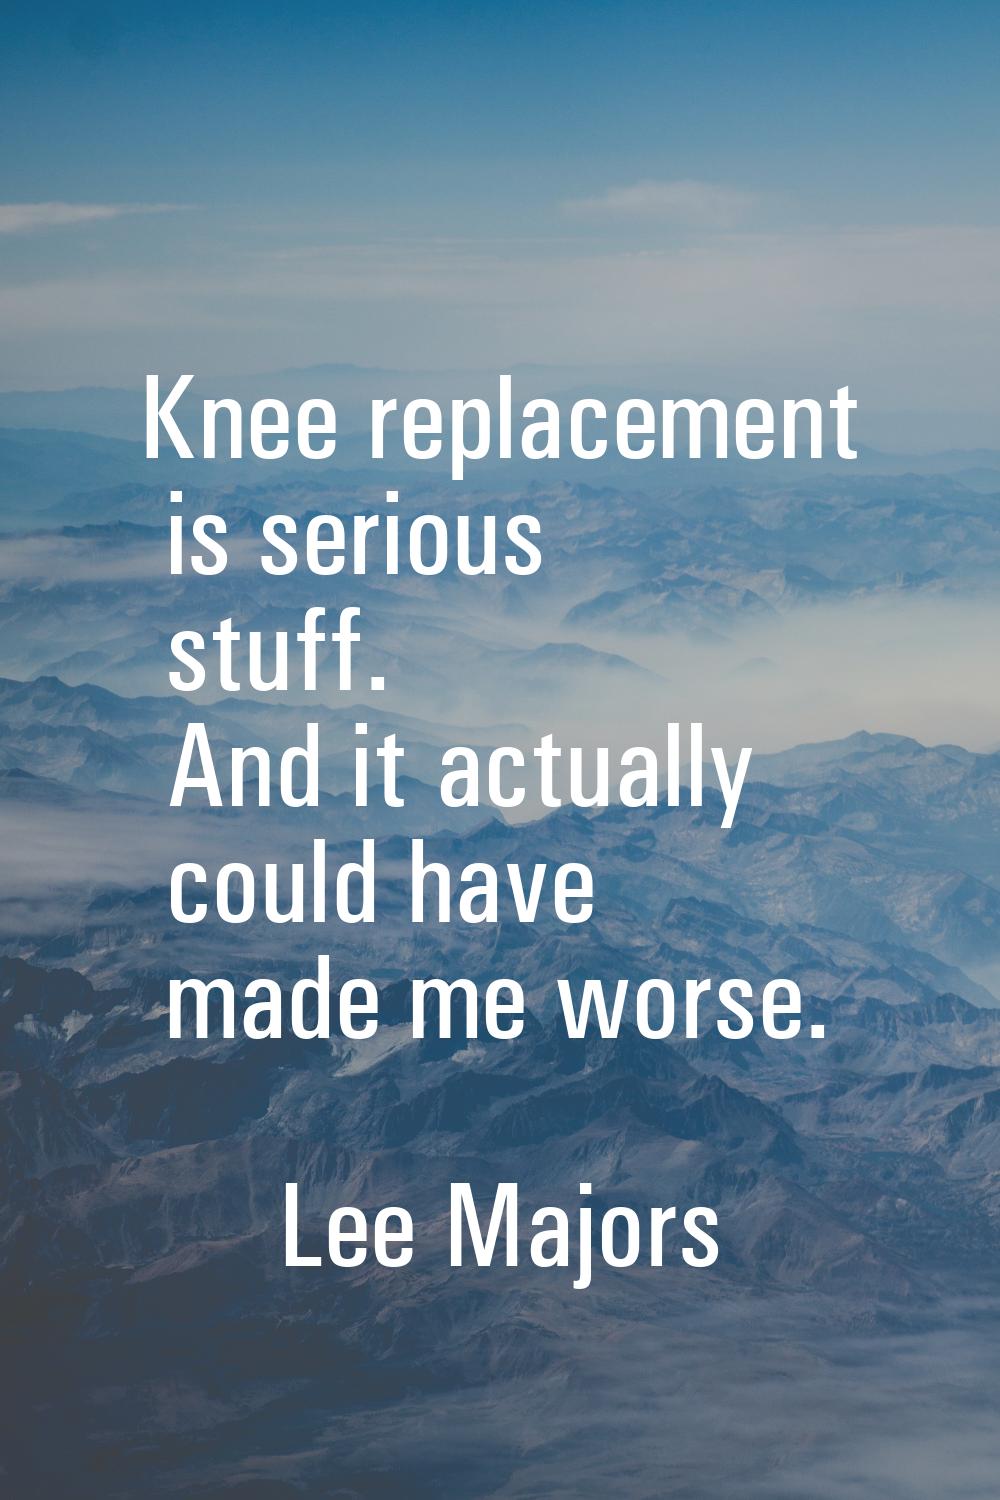 Knee replacement is serious stuff. And it actually could have made me worse.